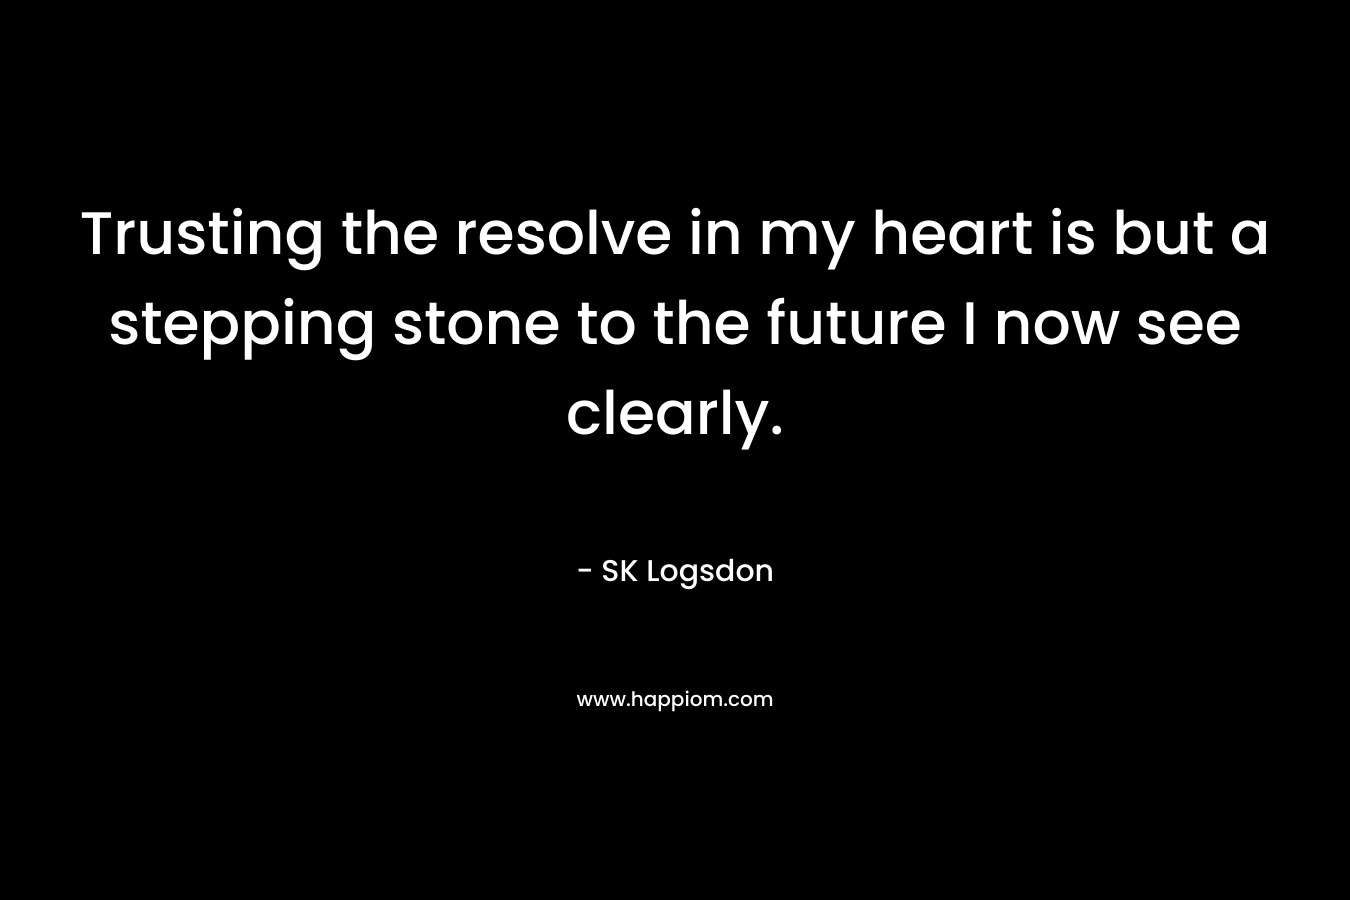 Trusting the resolve in my heart is but a stepping stone to the future I now see clearly. – SK Logsdon